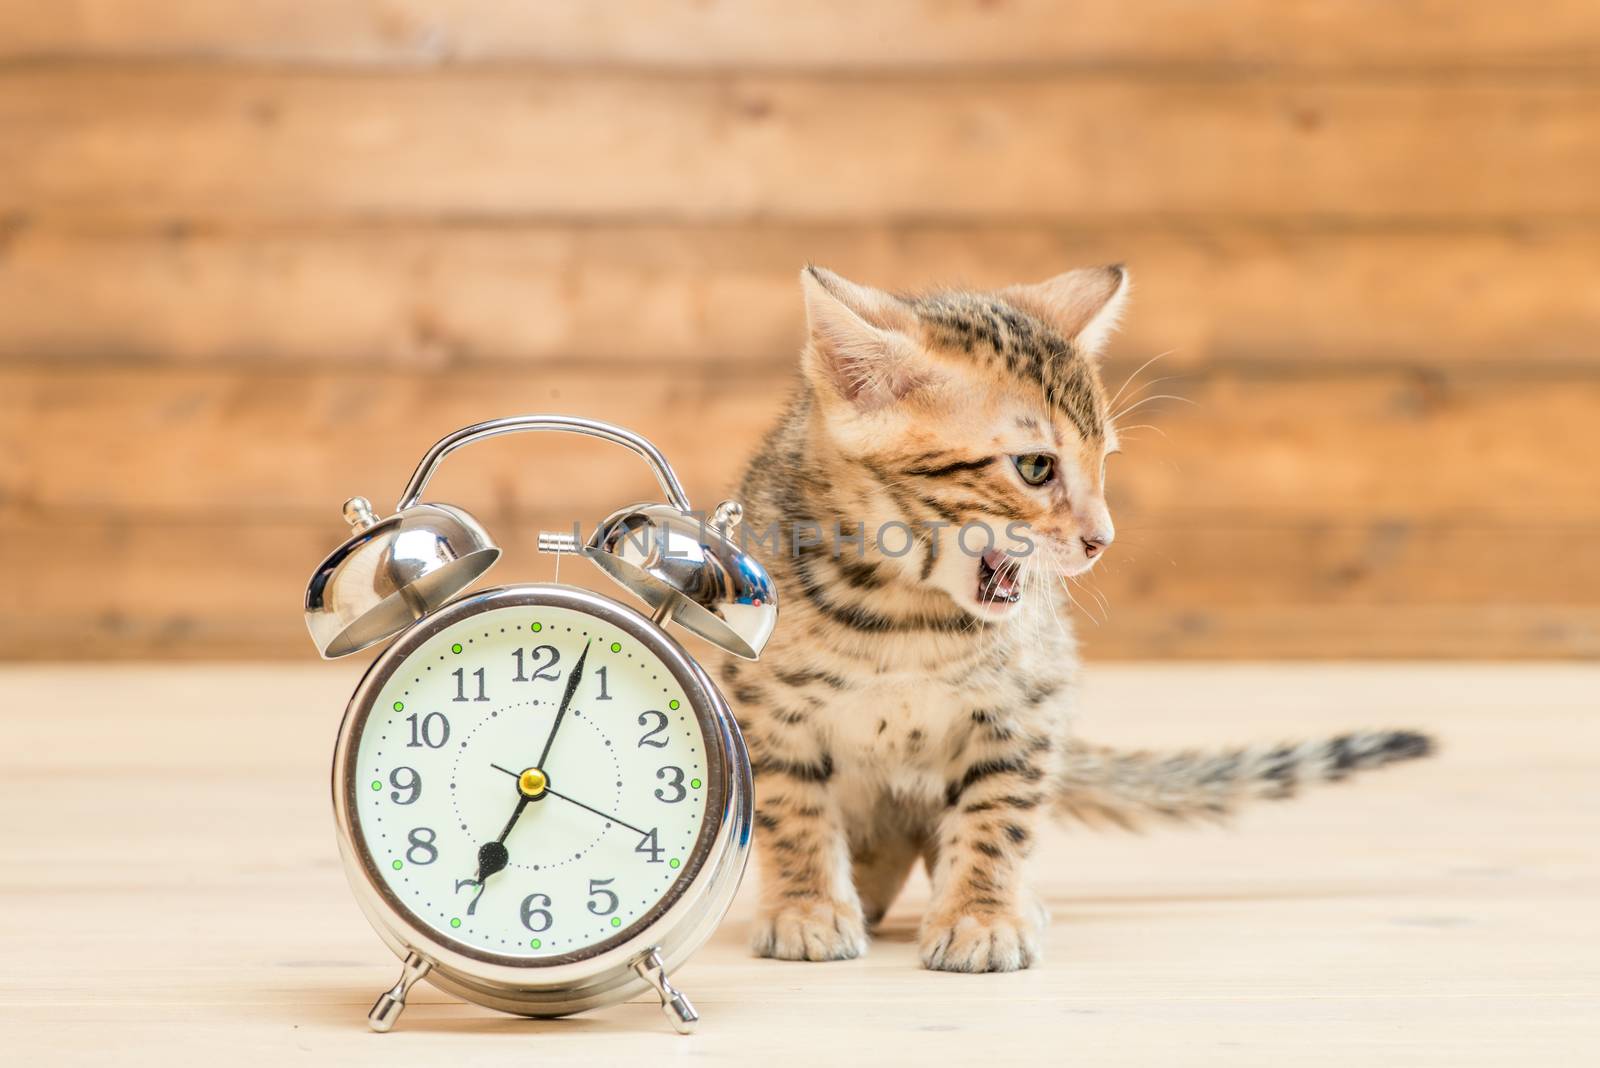 Bengal breed kitten and a retro alarm clock that shows 7 hours by kosmsos111